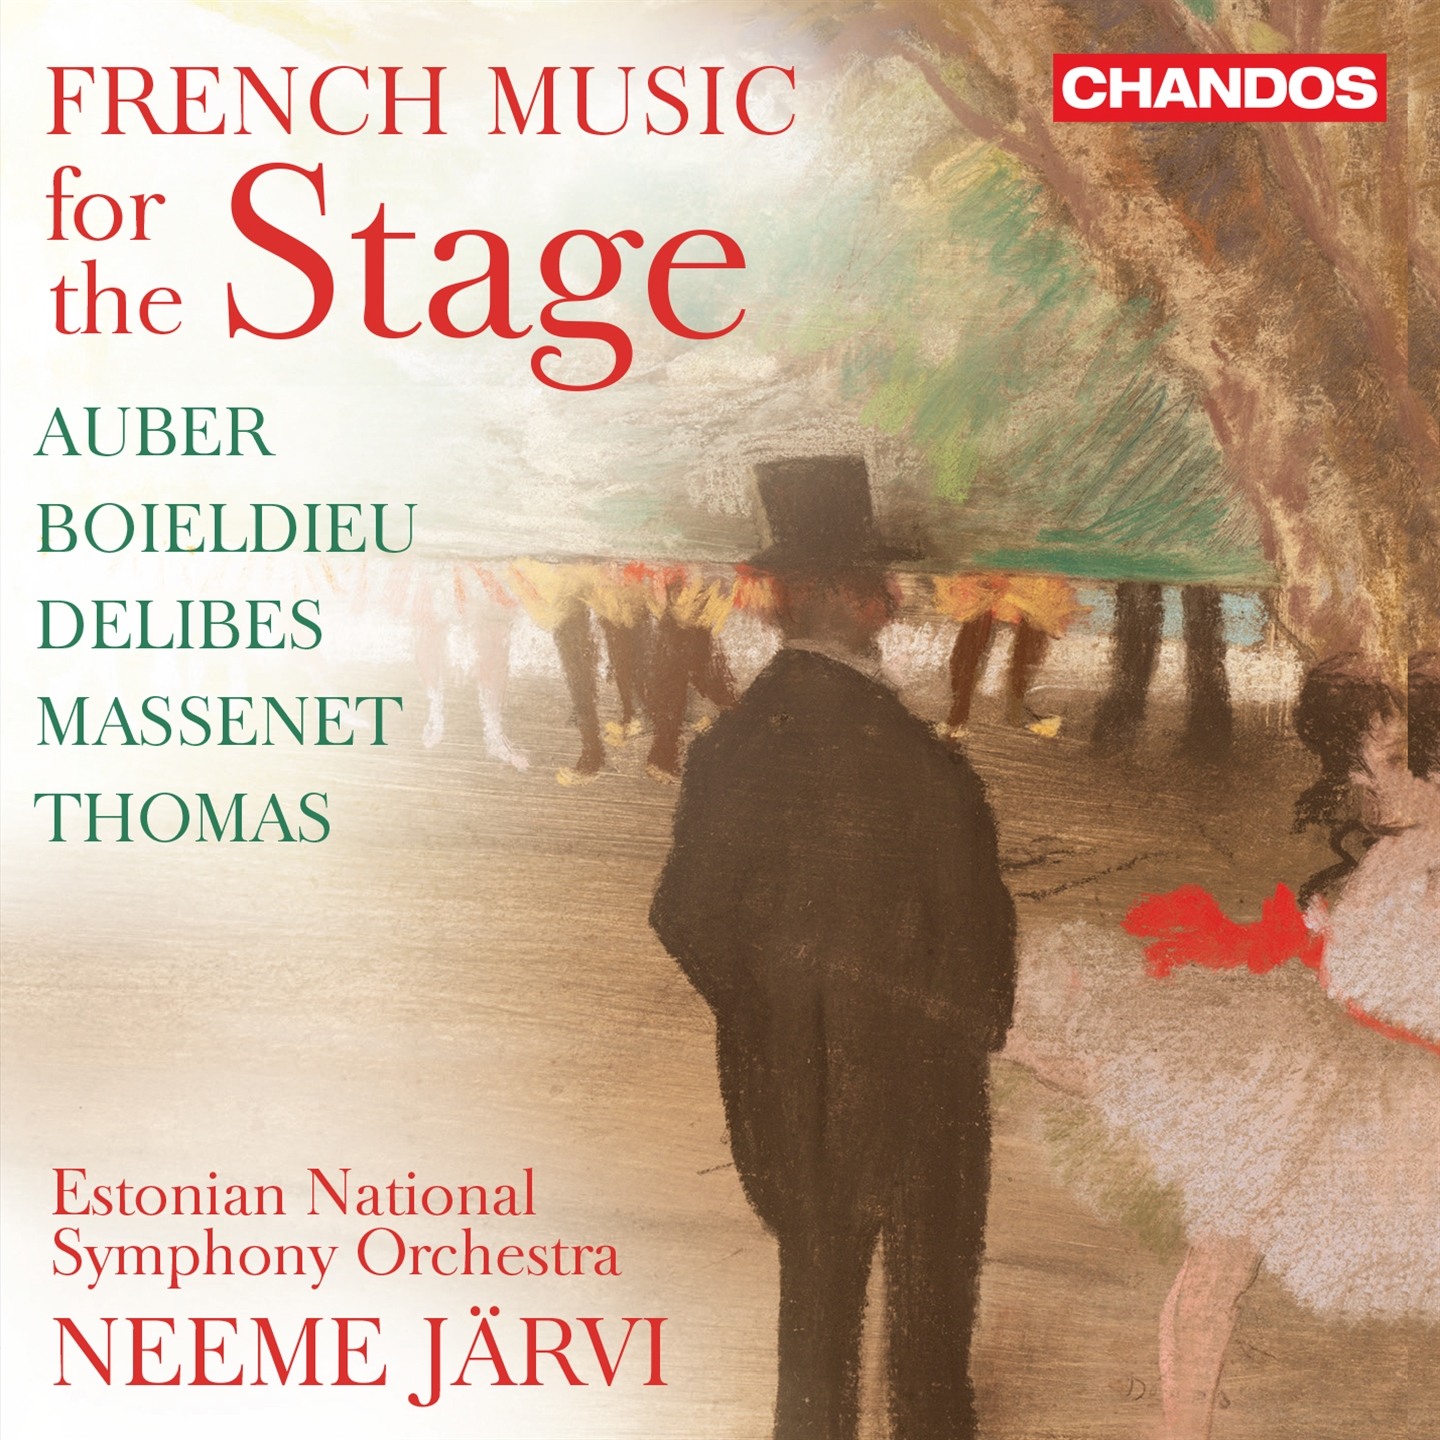 FRENCH MUSIC FOR THE STAGE